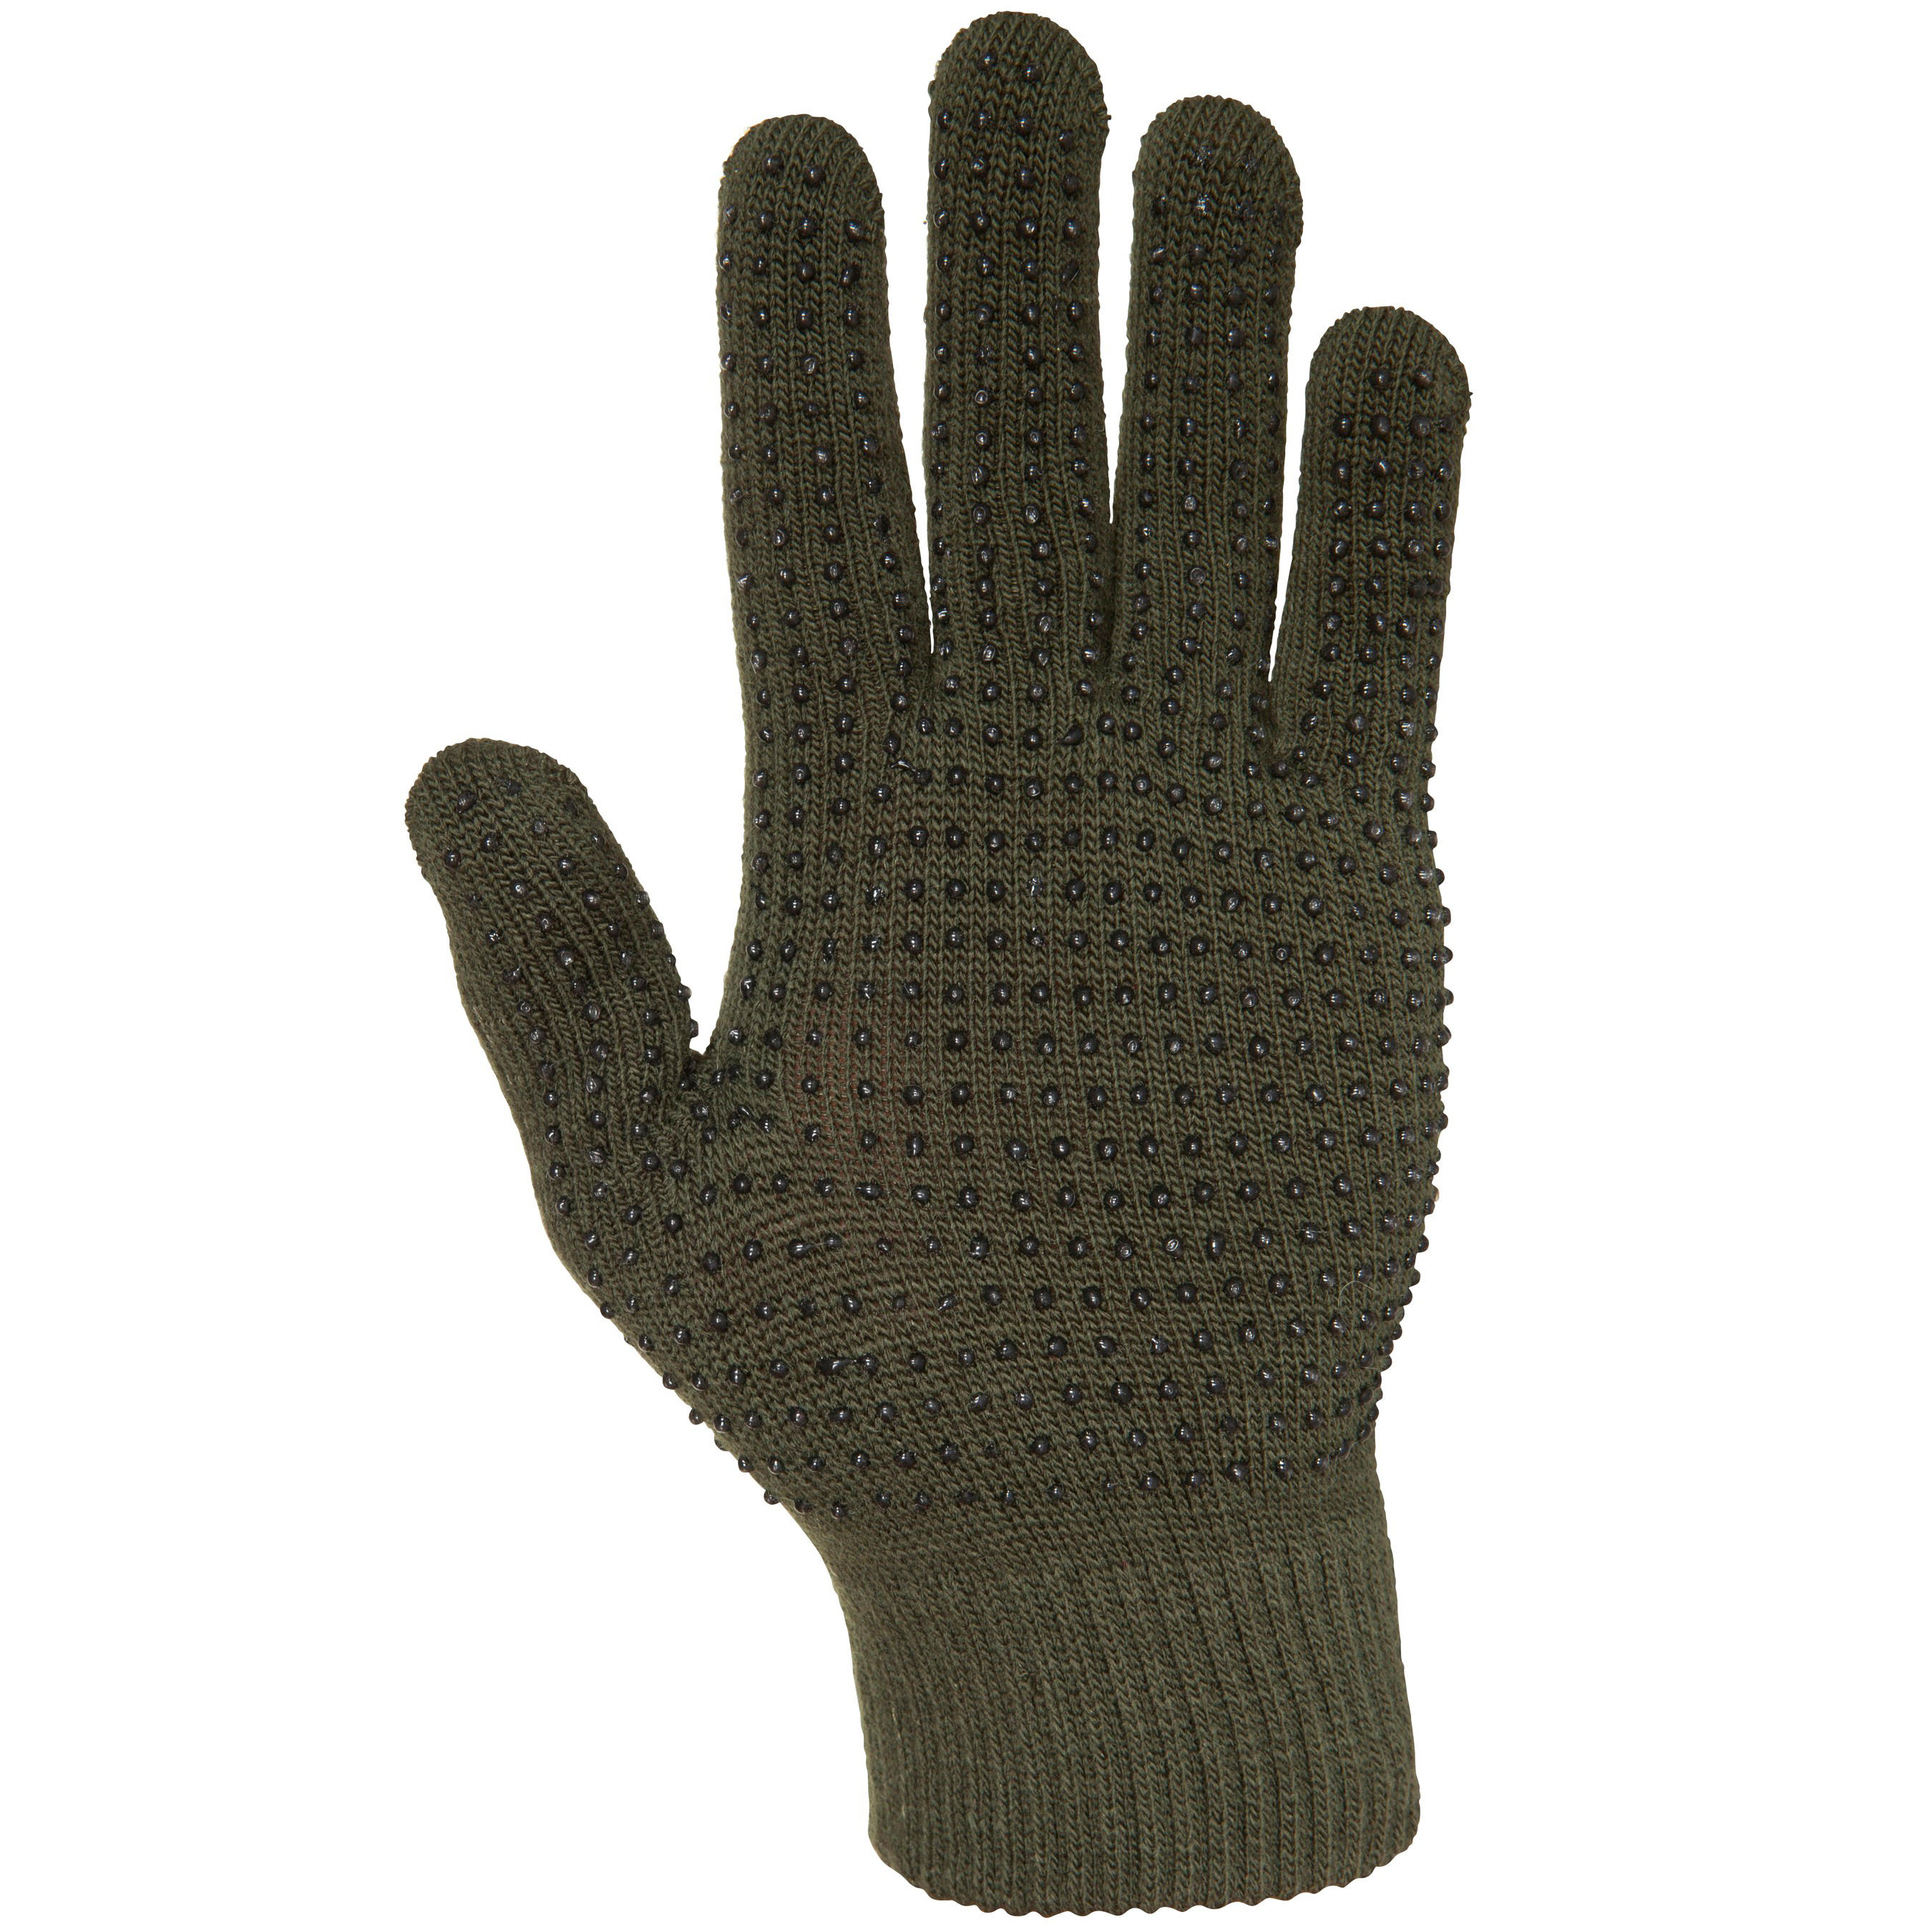 Warm Gloves with Pimpled Palm - Green 2/4